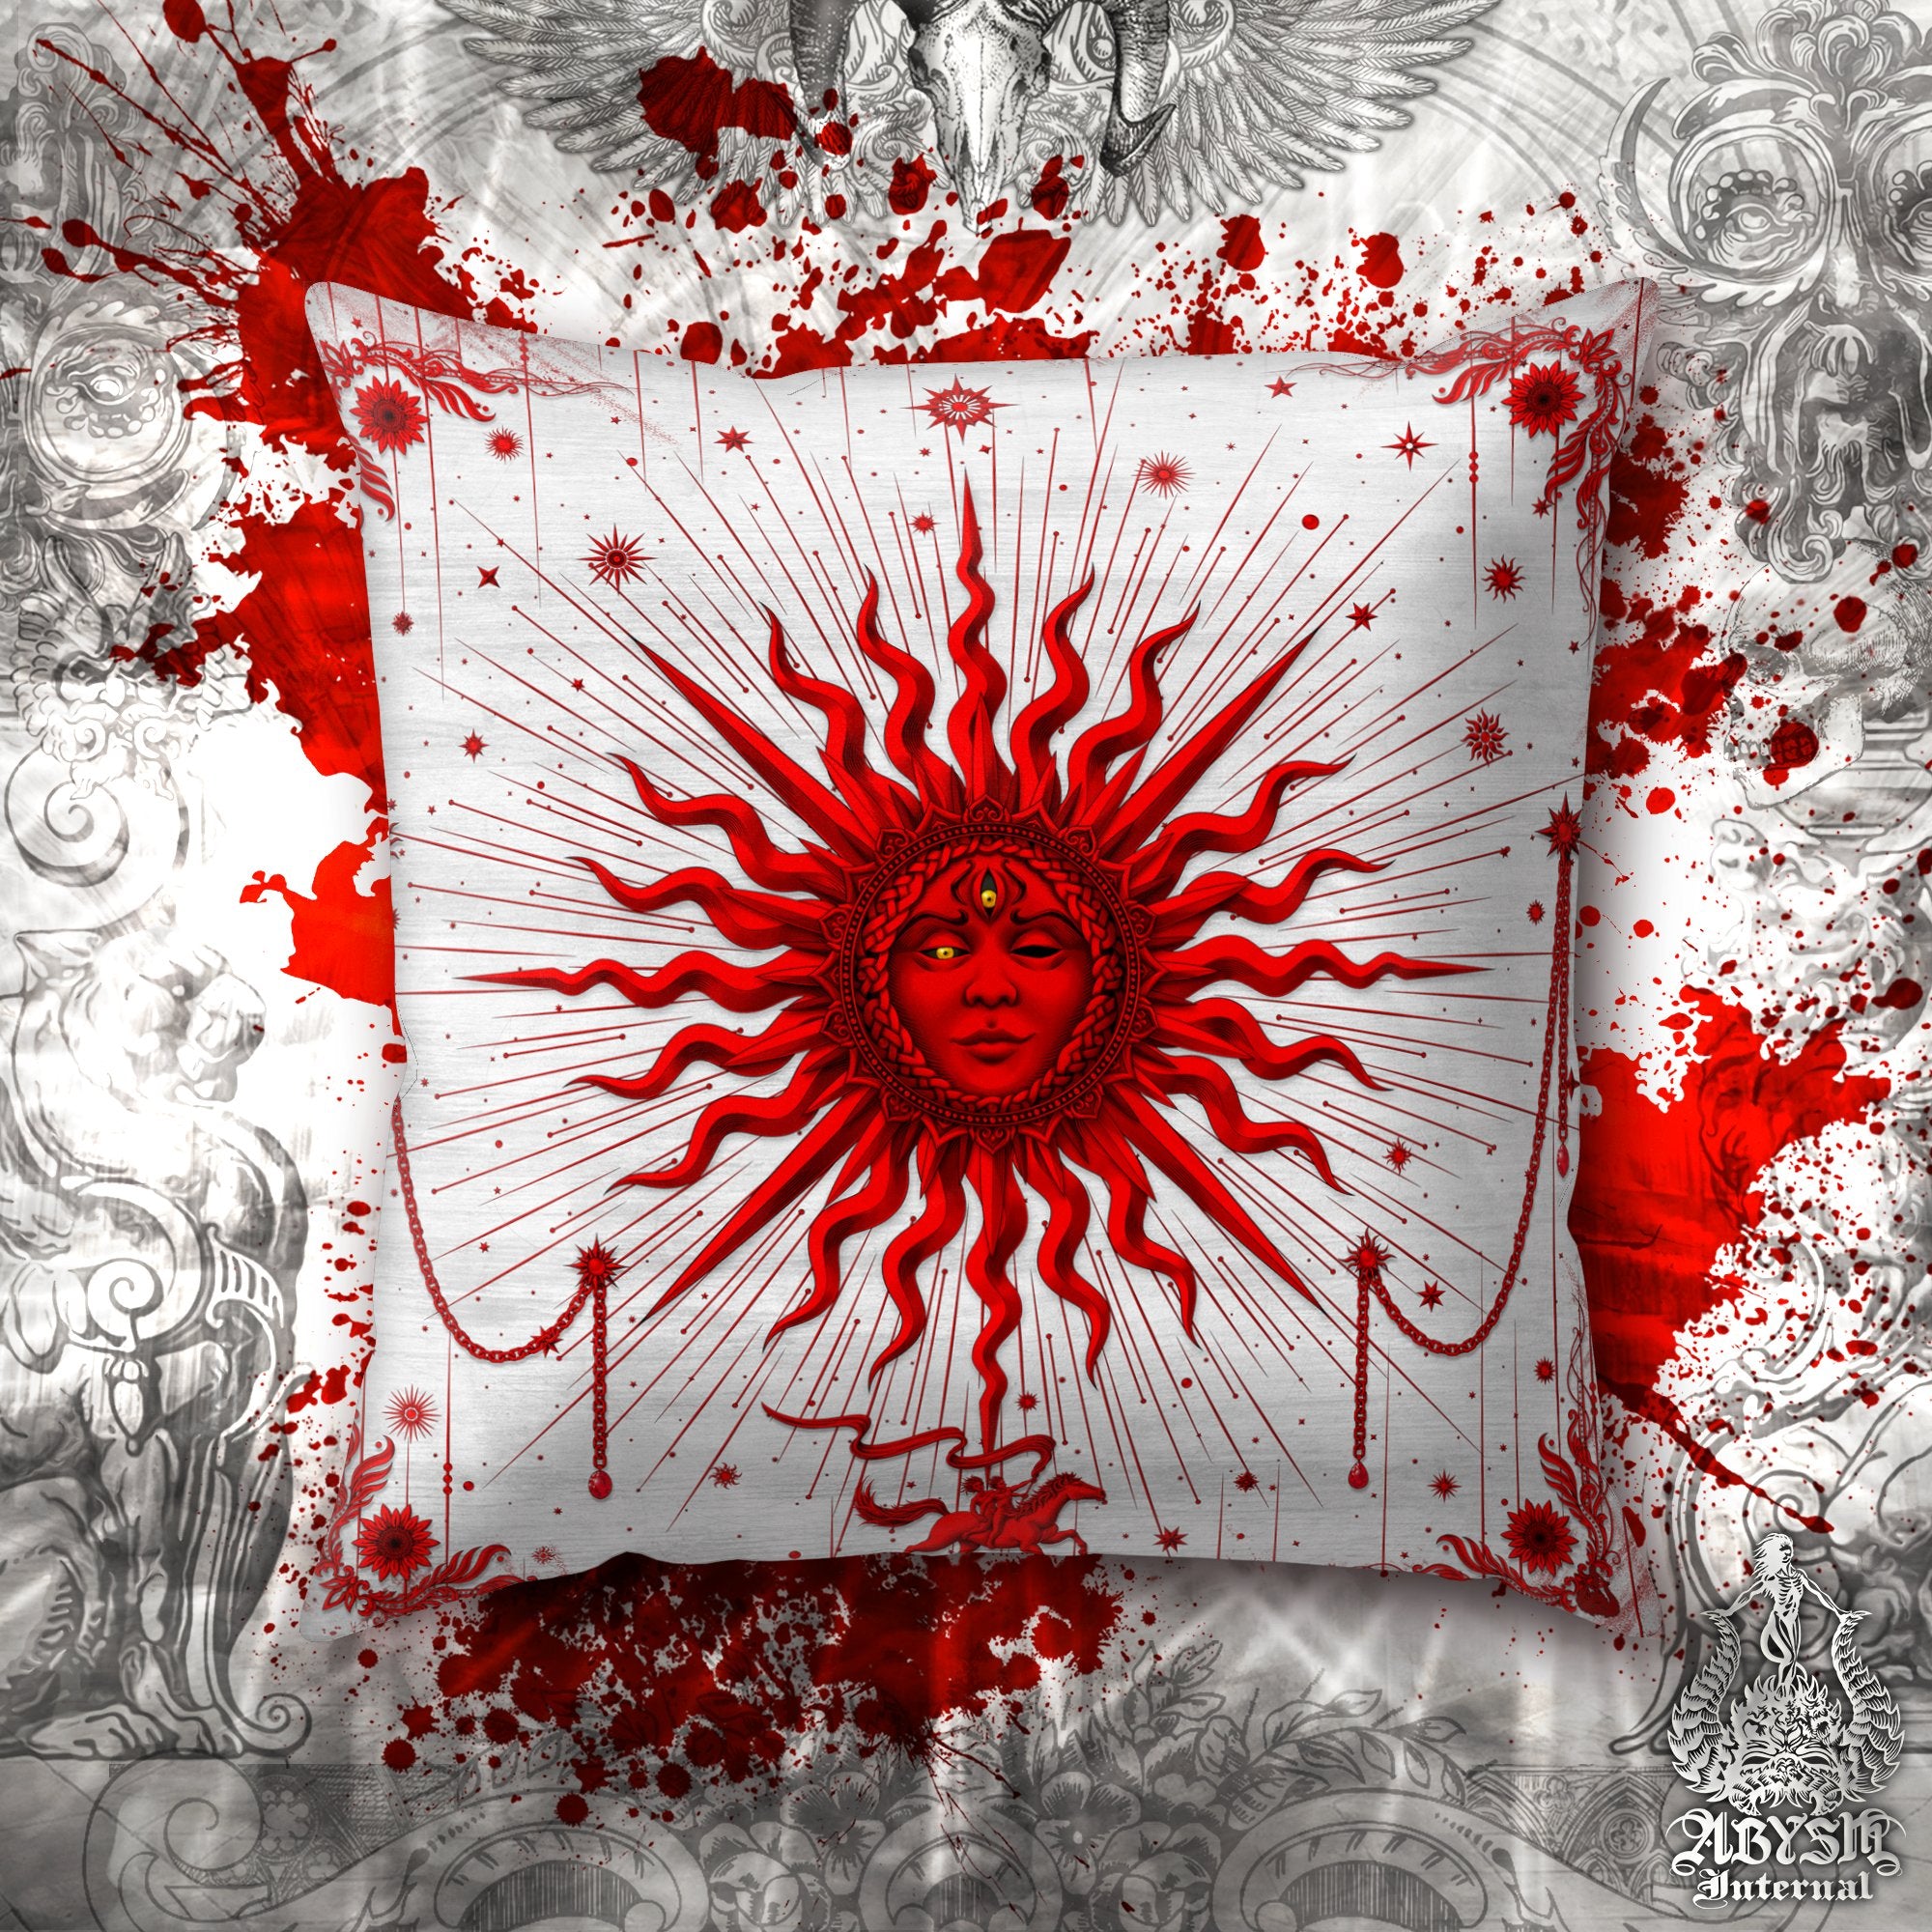 Bloody White Goth Throw Pillow, Decorative Accent Pillow, Square Cushion Cover, Red Sun, Arcana Tarot Art, Gothic Home, Fortune & Magic Room Decor - Abysm Internal